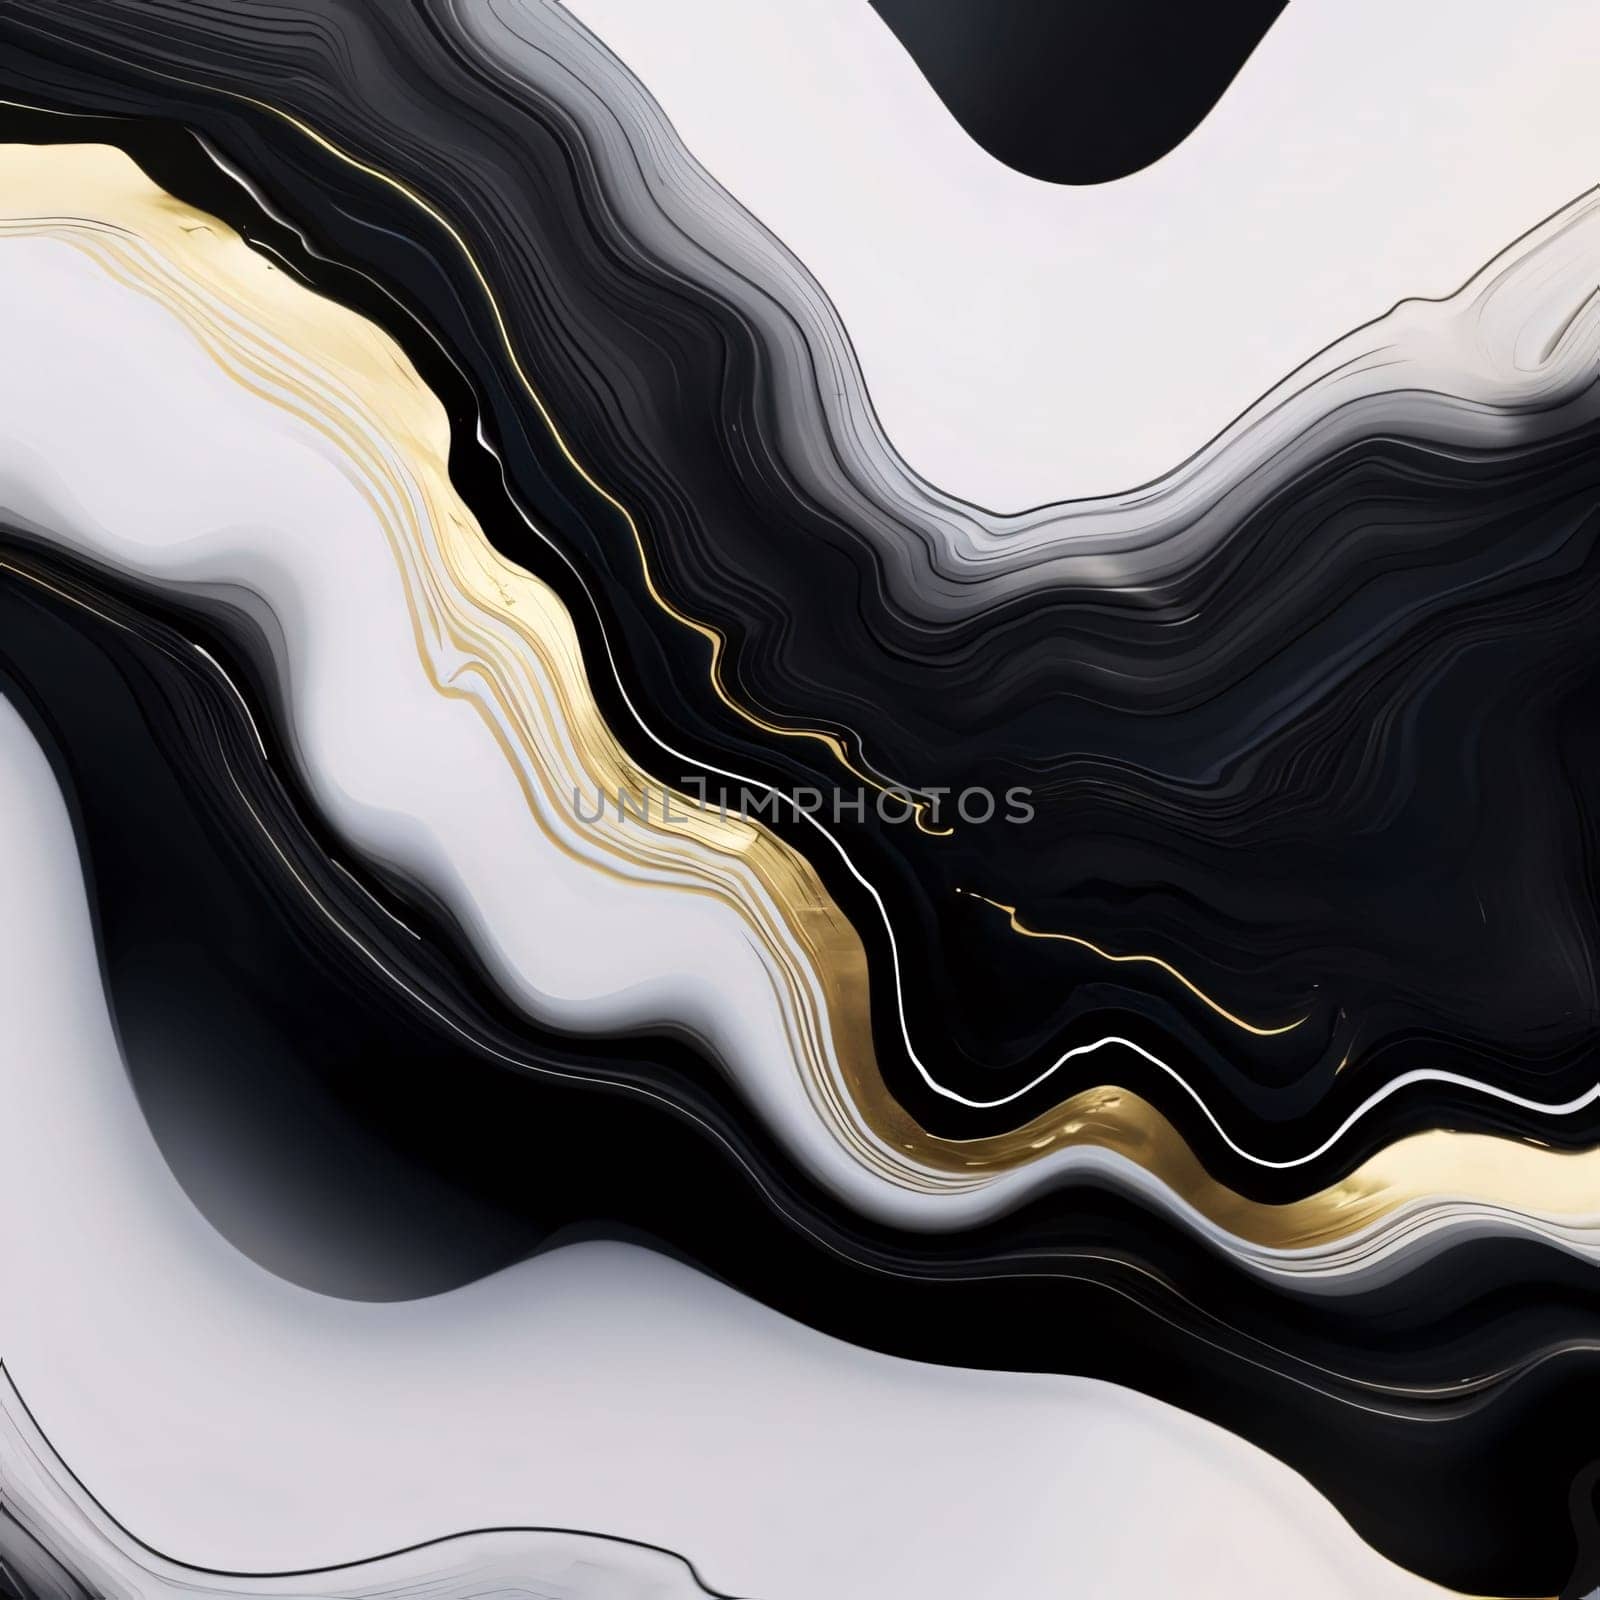 Abstract background design: Black and white marble background with gold pattern. 3d rendering, 3d illustration.